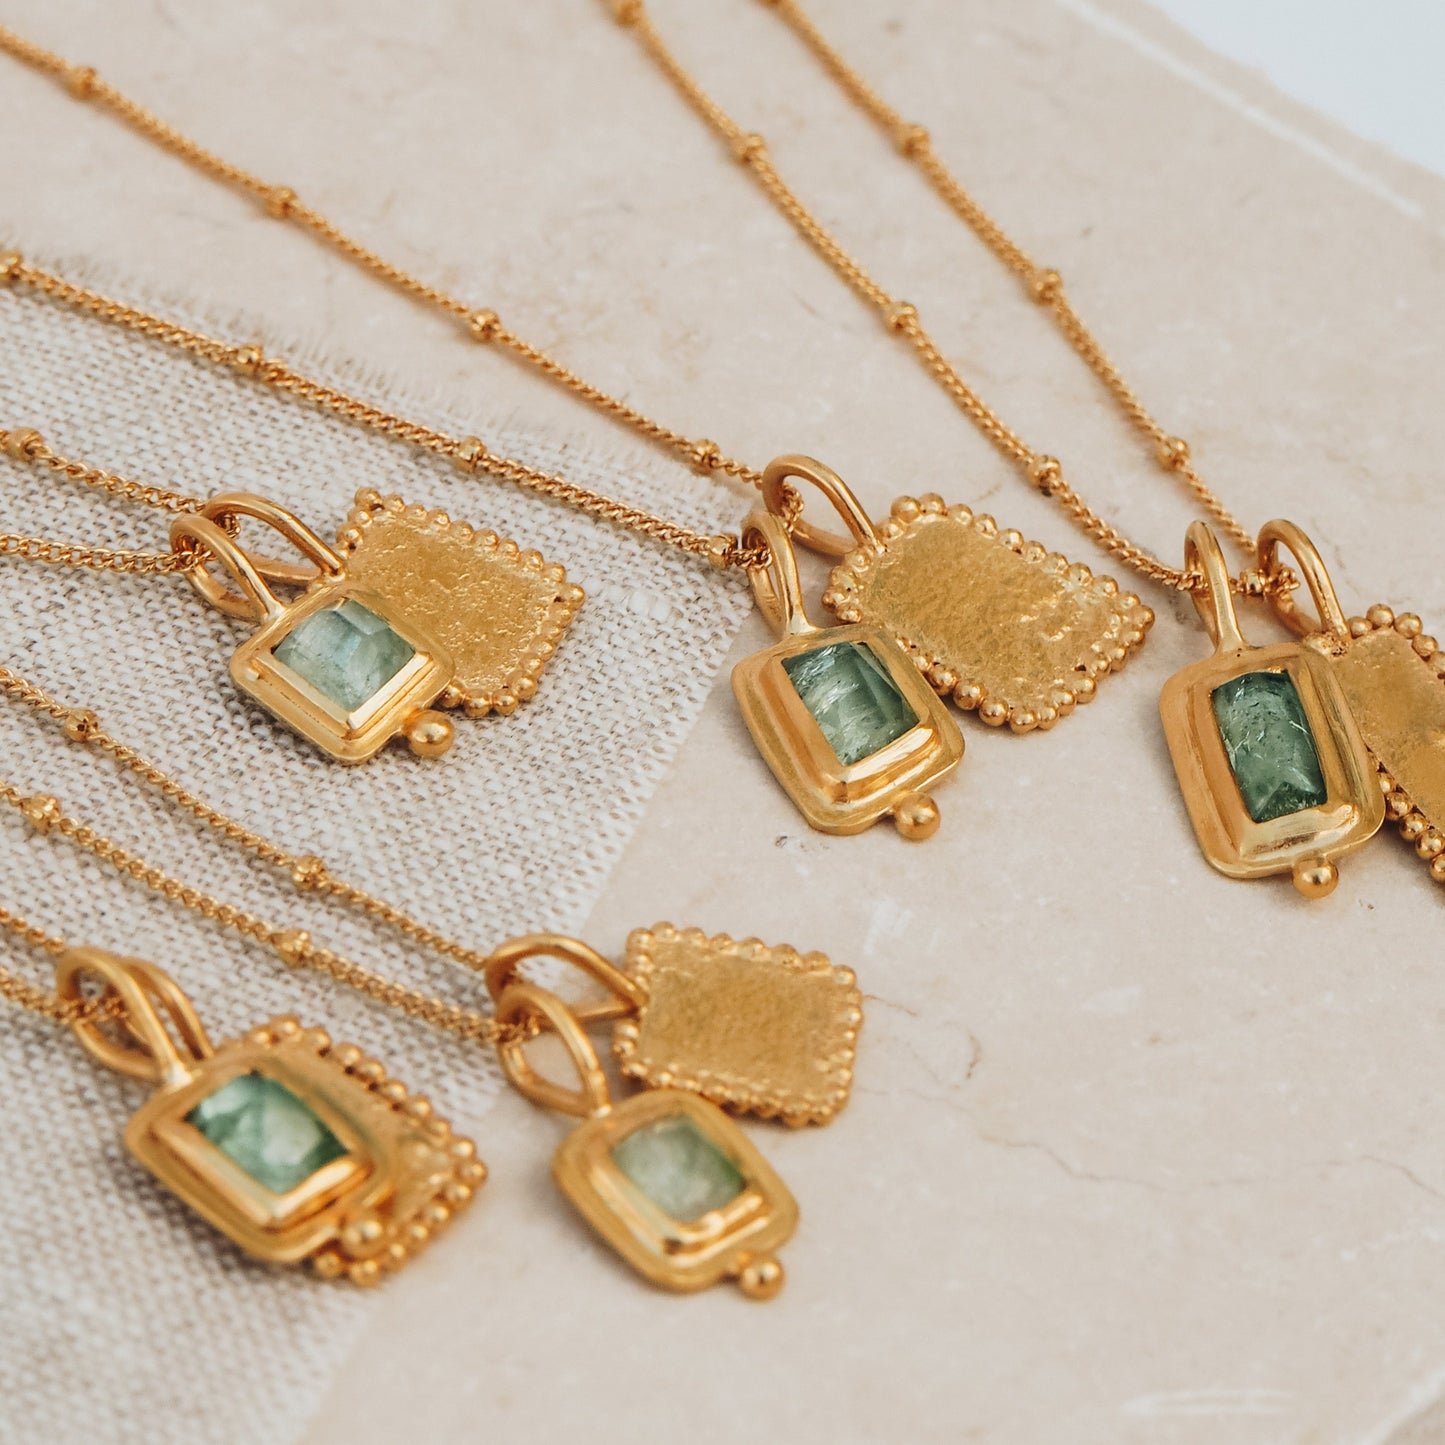 Collection of exquisite rich gold necklaces, each highlighting a square pendant adorned with a captivating ocean blue rose cut tourmaline gemstone, textured surfaces, and intricate granulation craftsmanship.